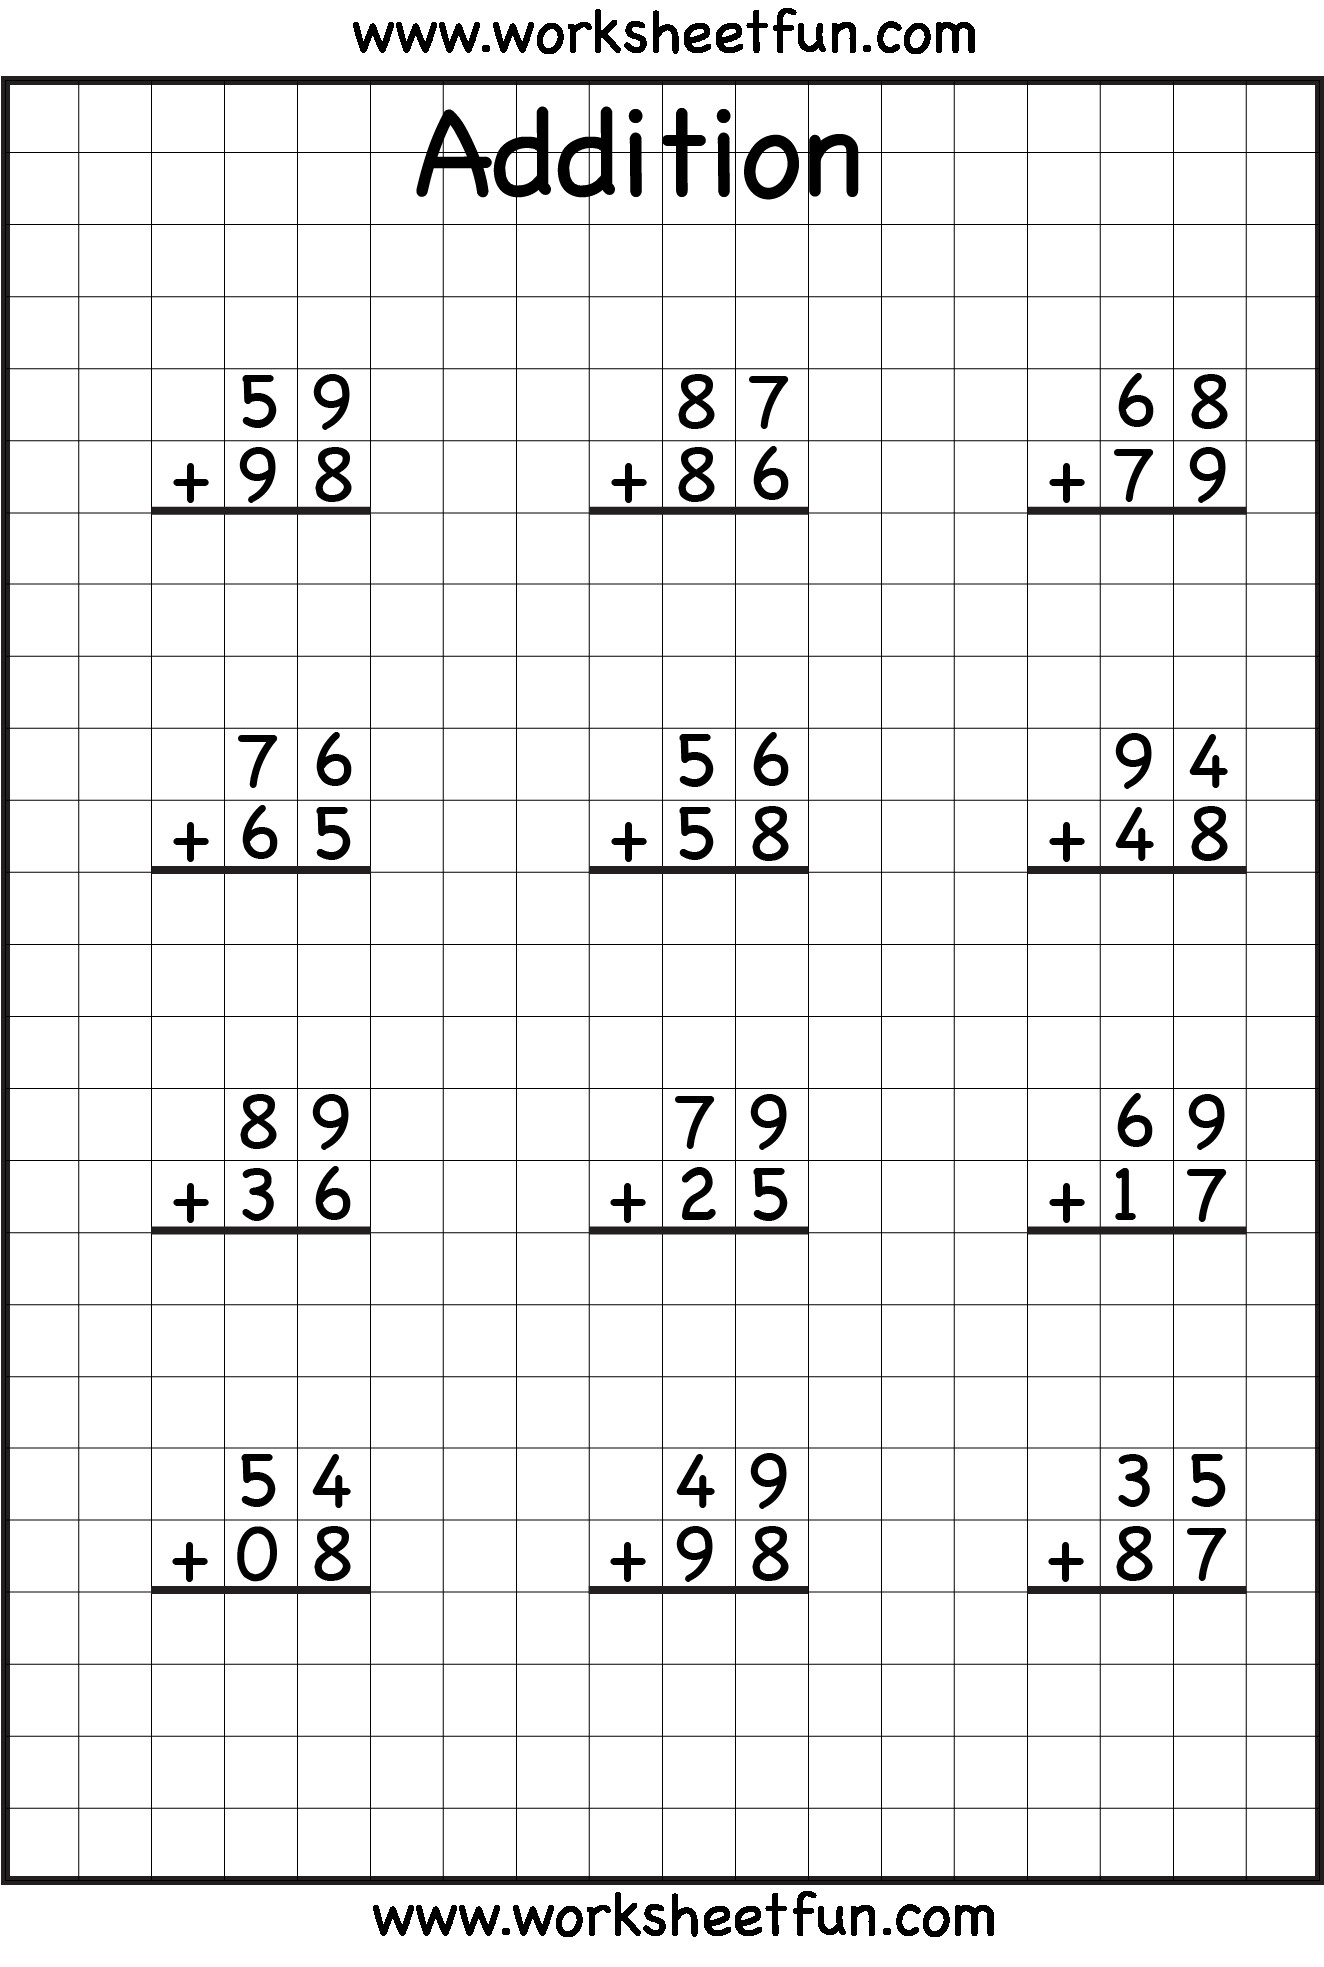 Free Math Worksheets Third Grade 3 Addition Add 3 3 Digit Numbers In Columns